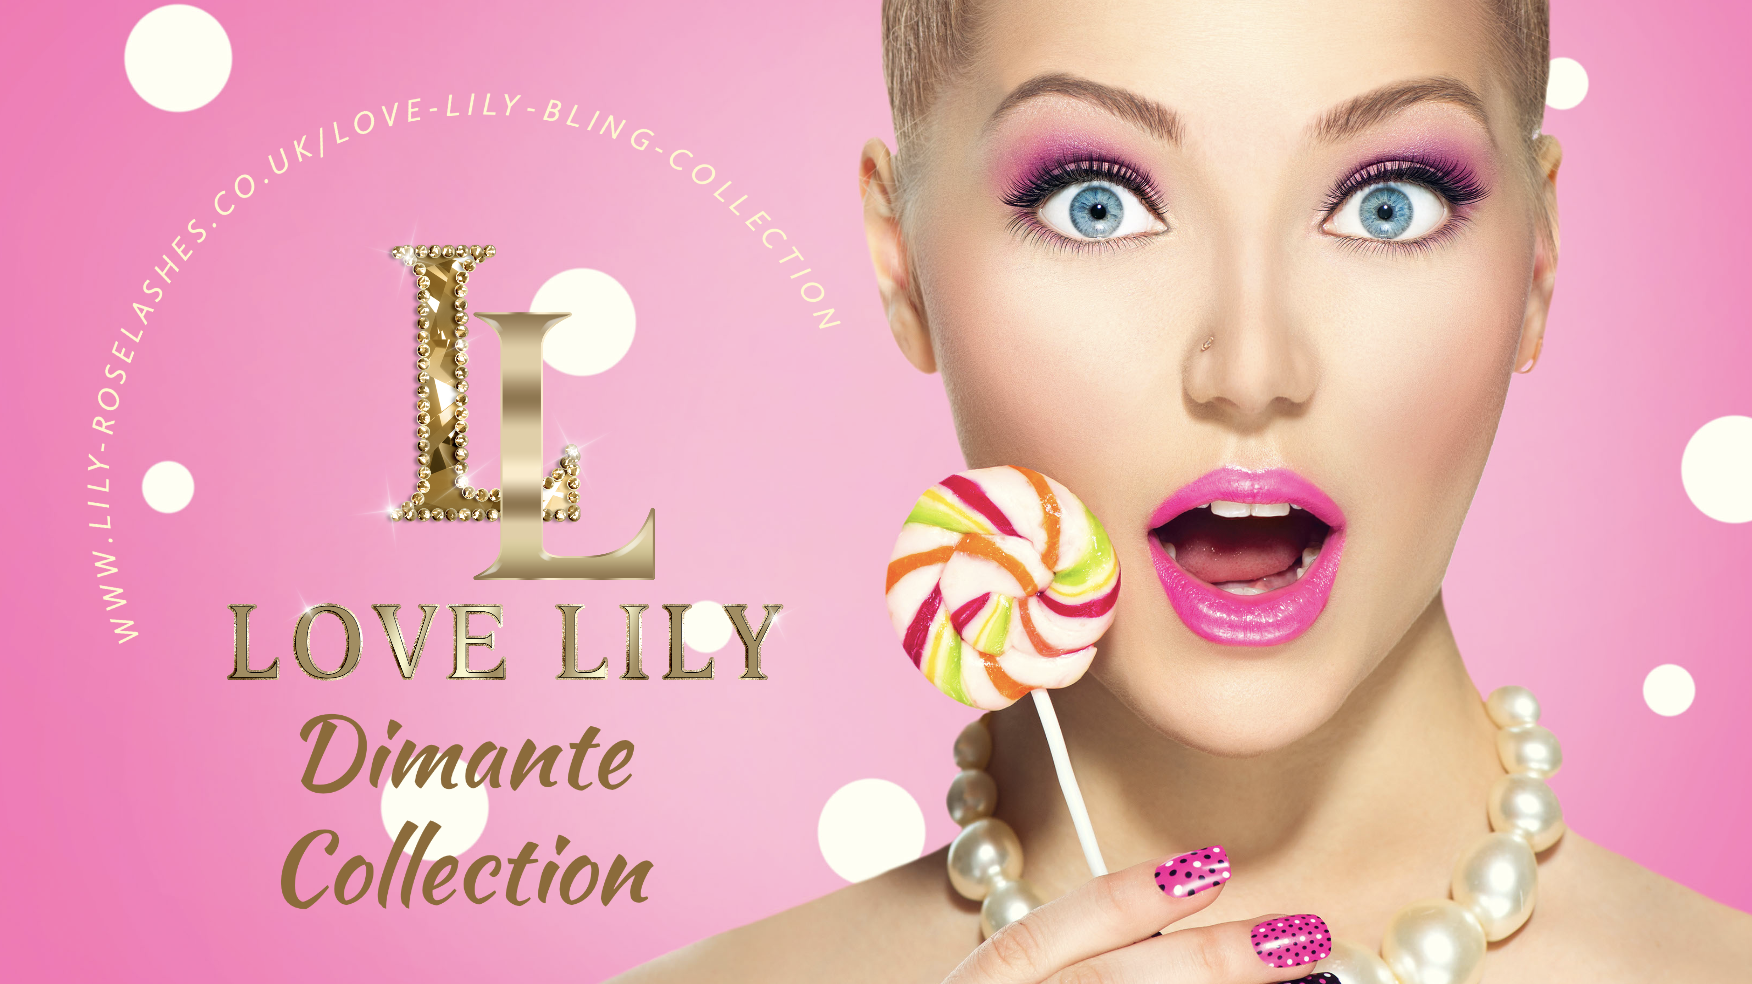 LOVE LILY DIMANTIE COLLECTION